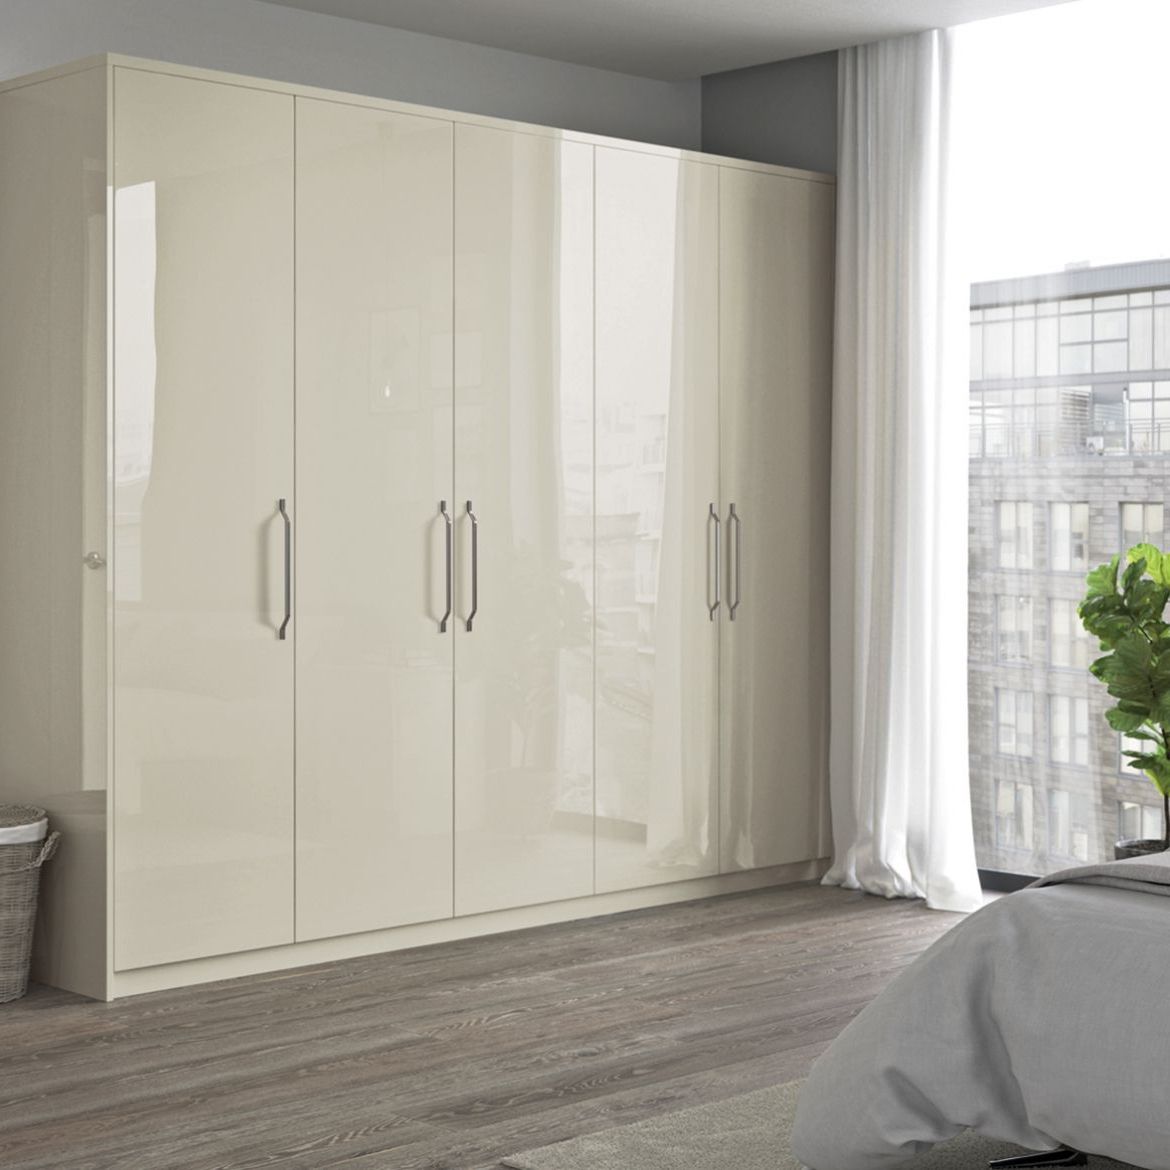 Reflections Wardrobe | Cash & Carry Kitchens Pertaining To High Gloss Wardrobes (Gallery 8 of 20)